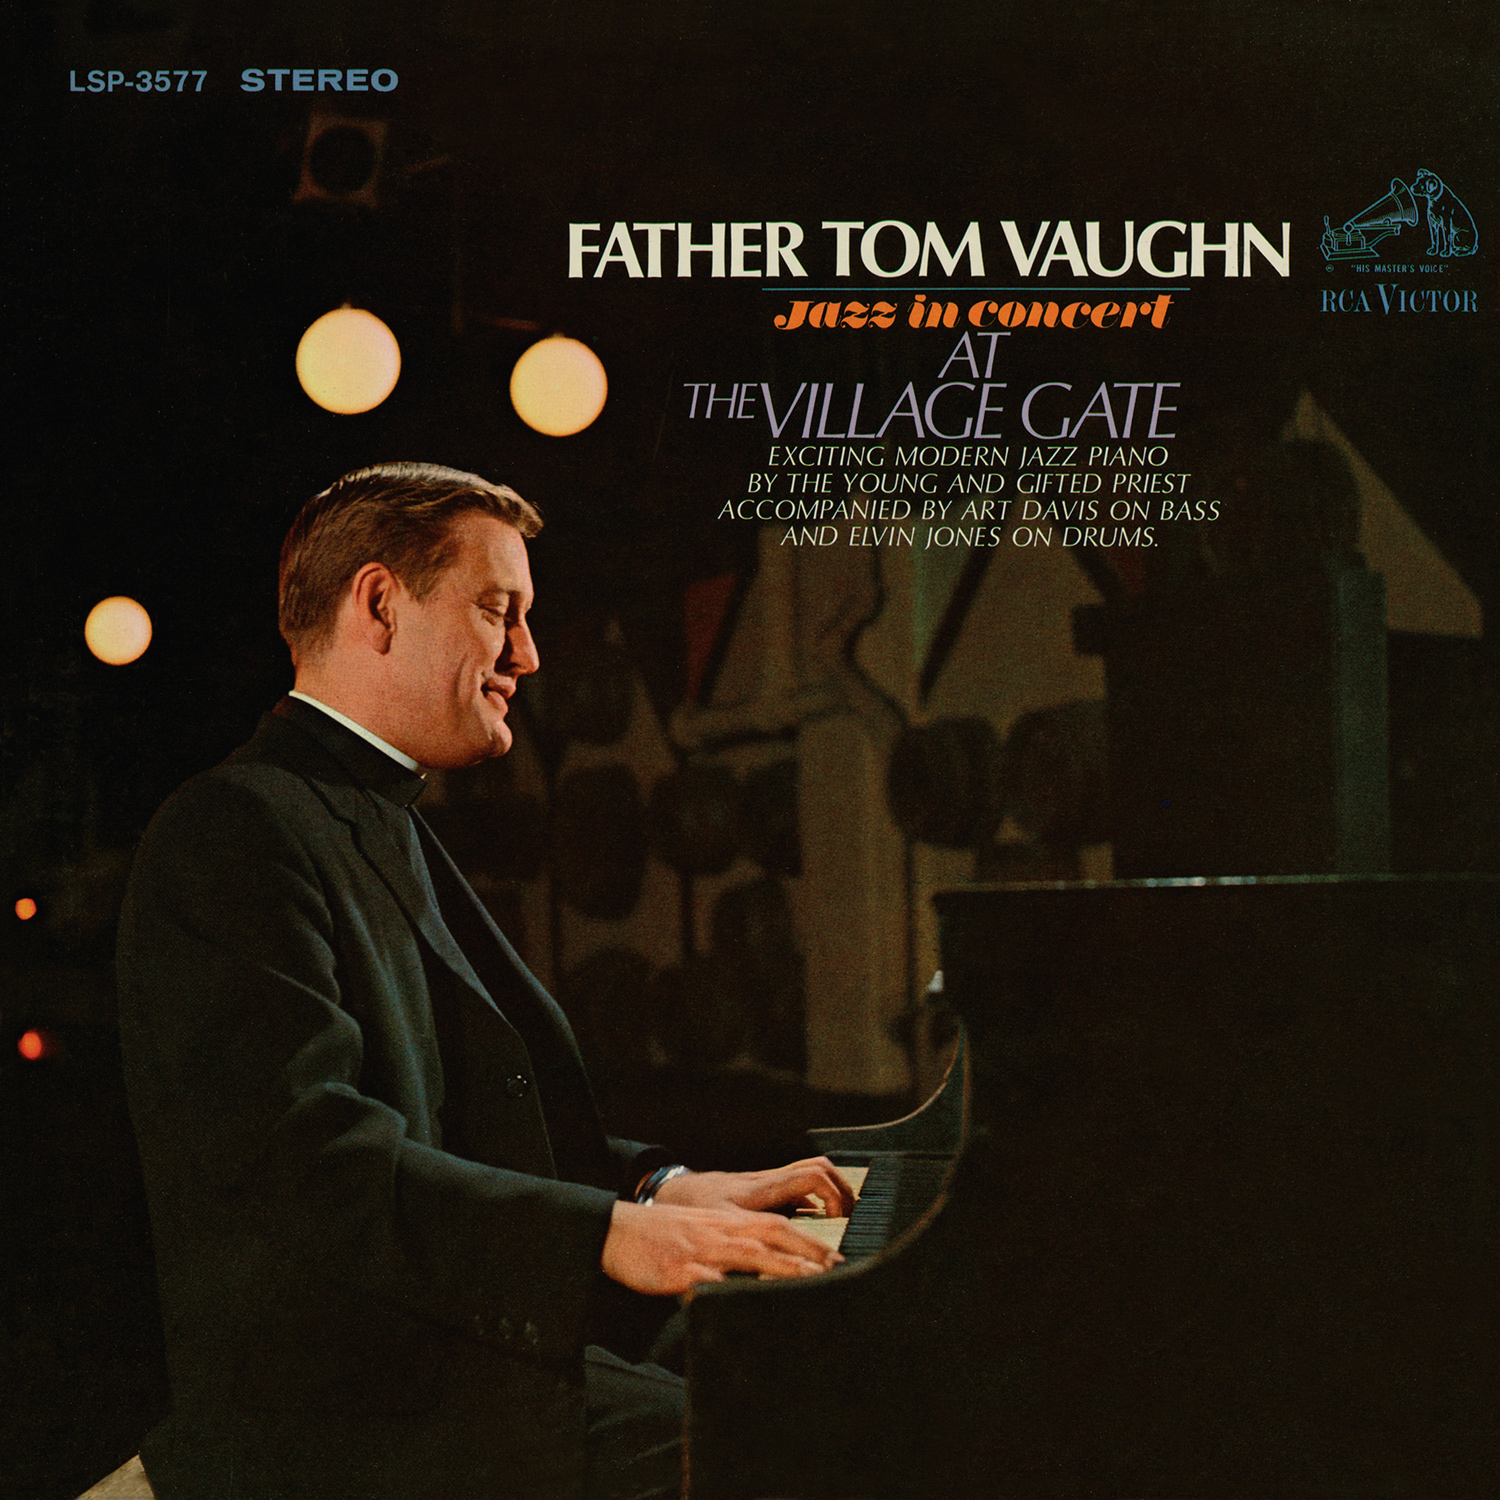 Father Tom Vaughn – Jazz In Concert At The Village Gate (1966/2016) [HDTracks FLAC 24bit/192kHz]